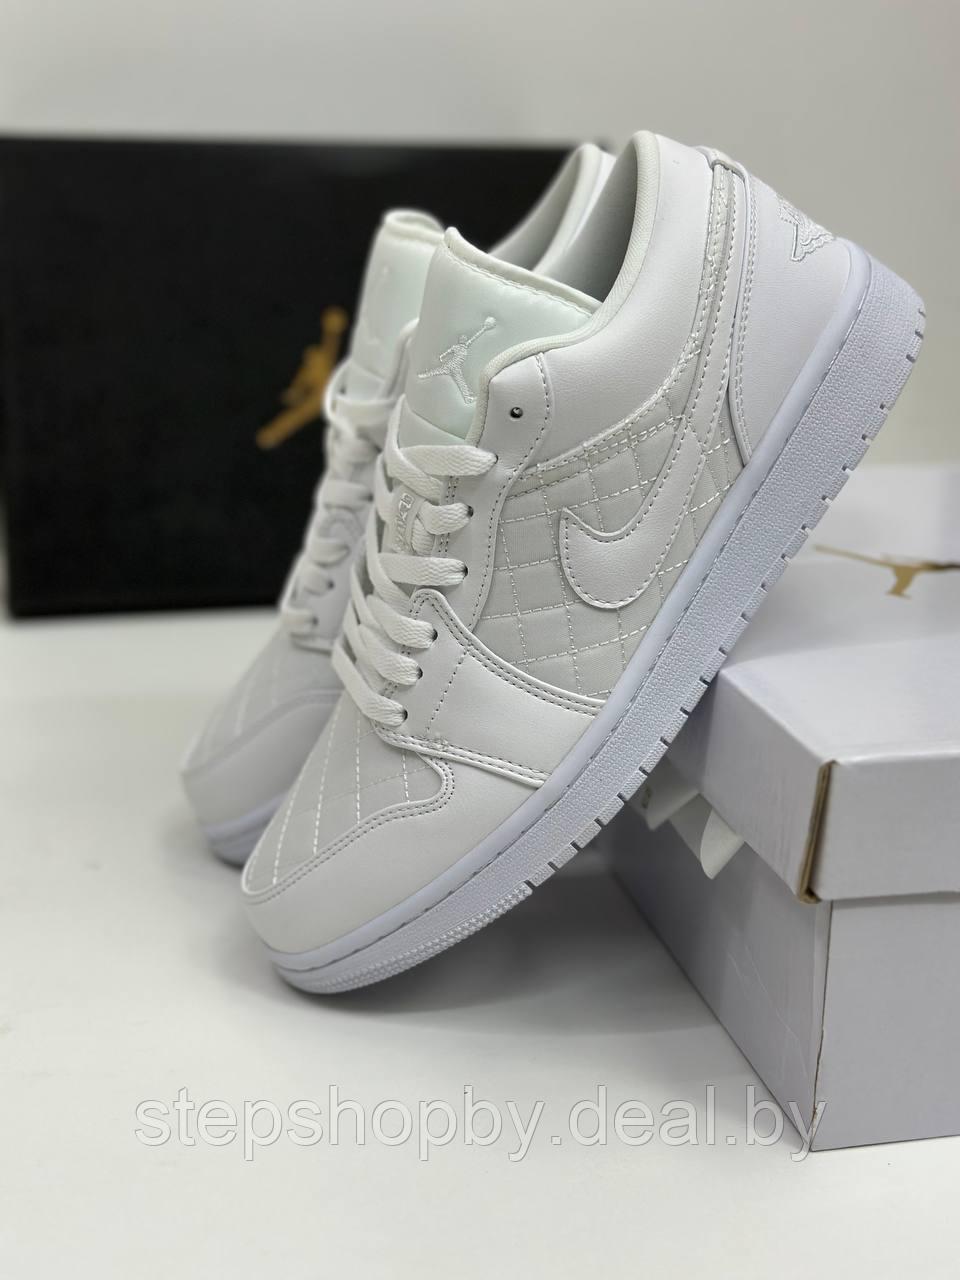 Кроссовки Nike Air Jordan 1 Low Quilted White - фото 3 - id-p212910441